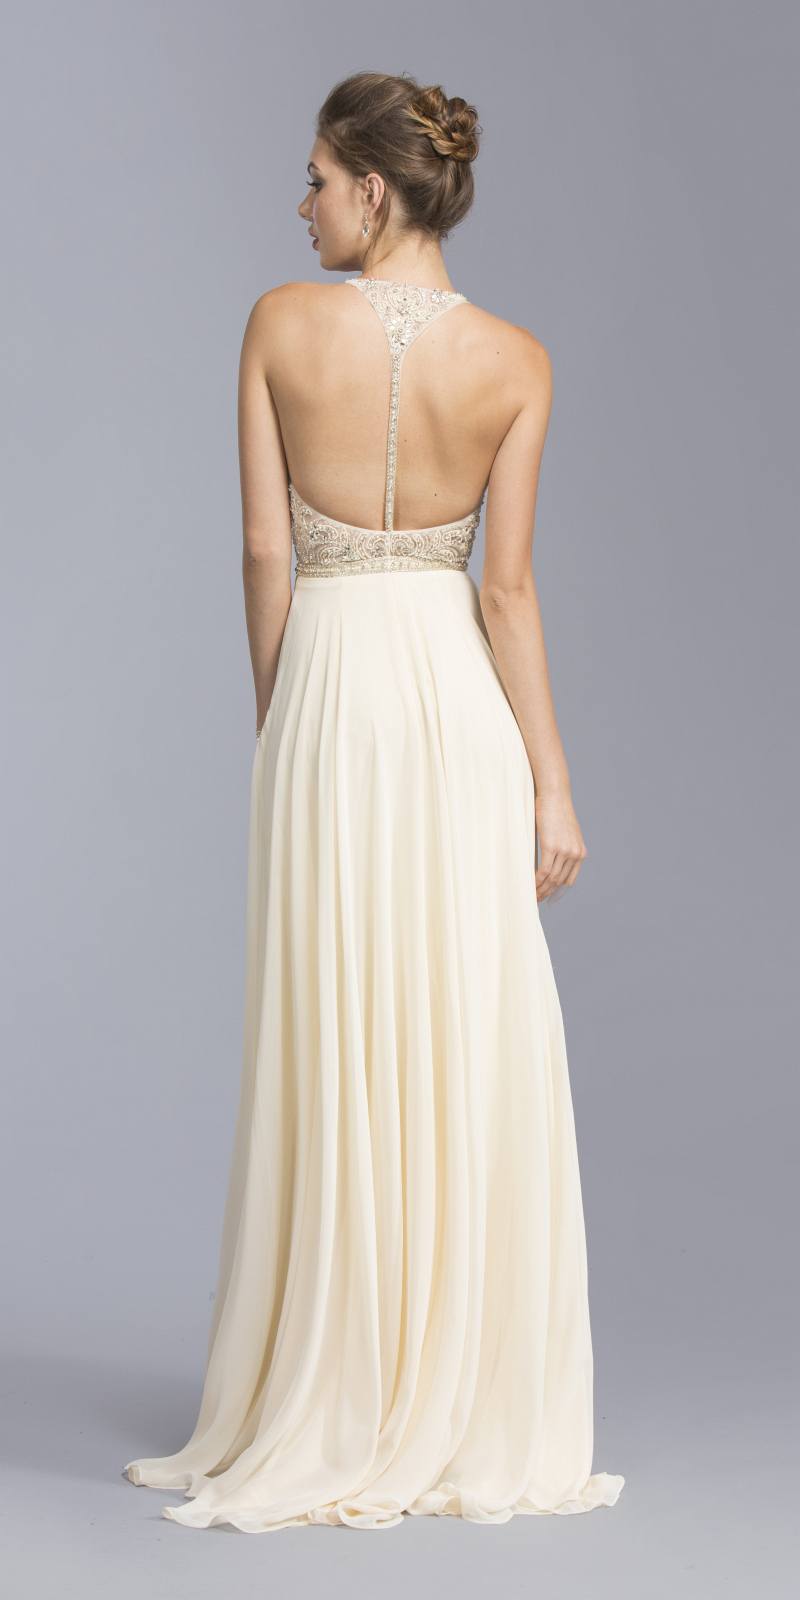 Champagne Beaded Illusion Bodice Long Formal Dress